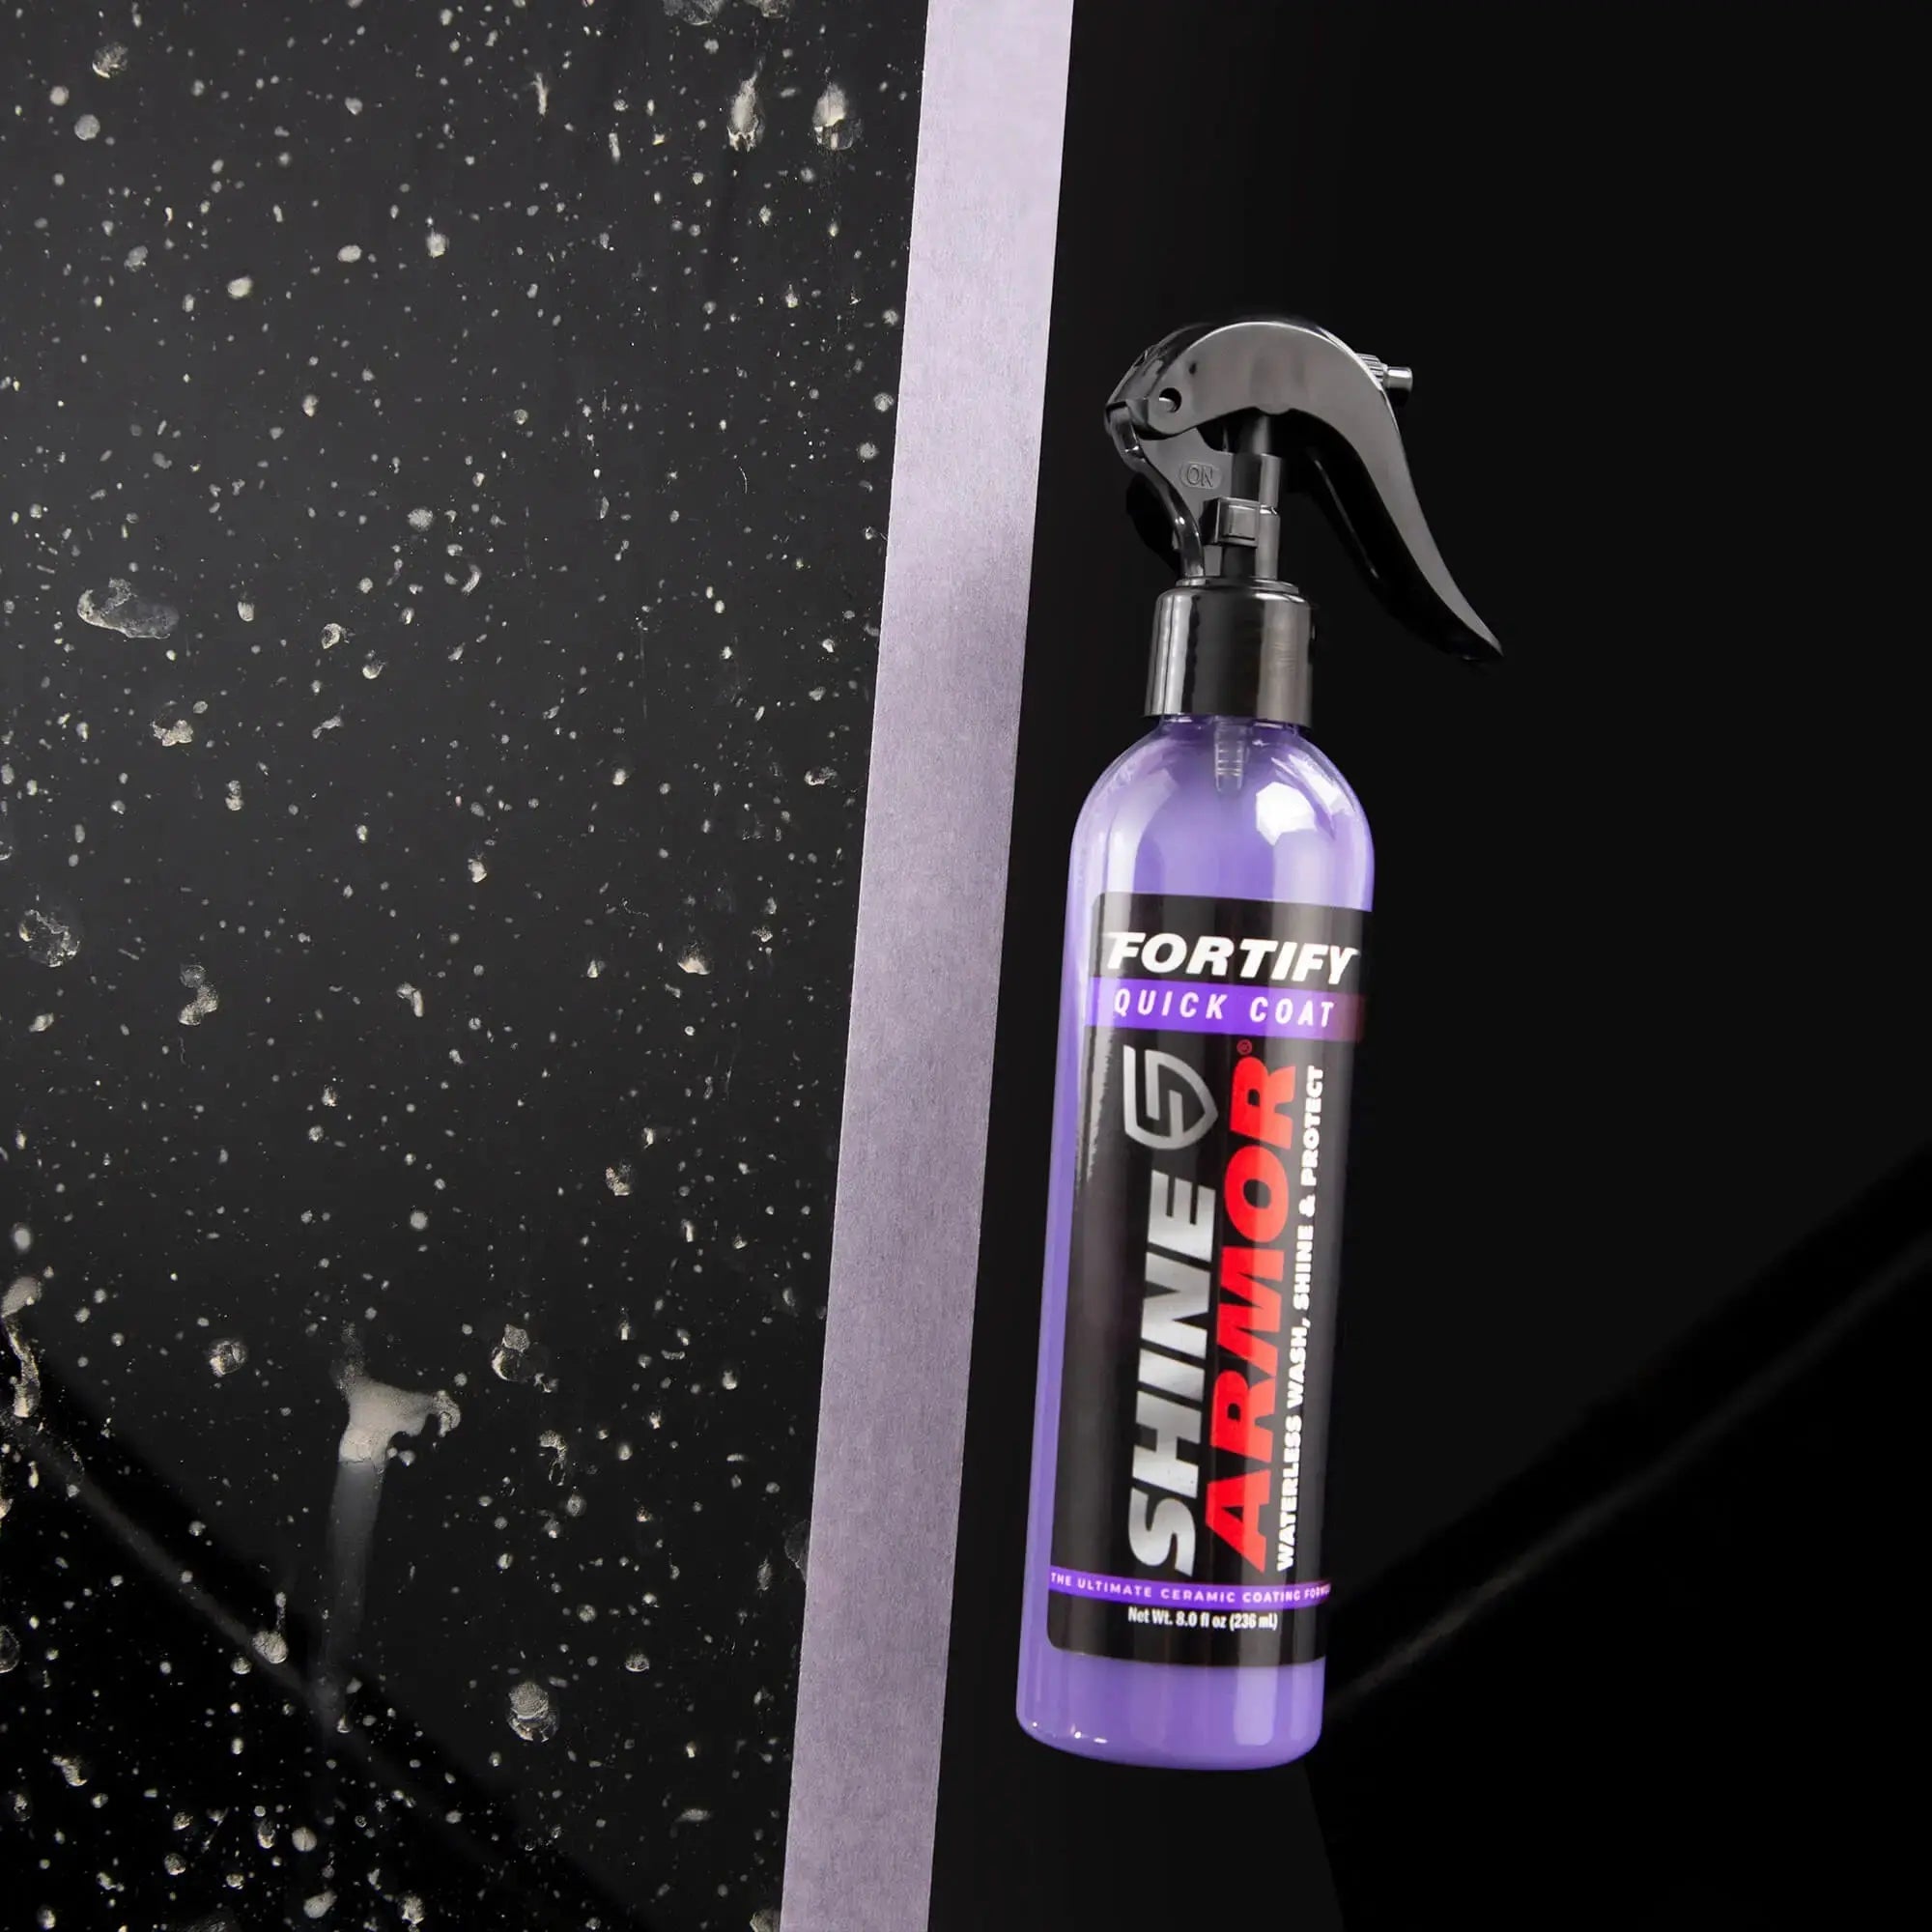 Quick and easy car detailing solution - Fortify Quick Coat